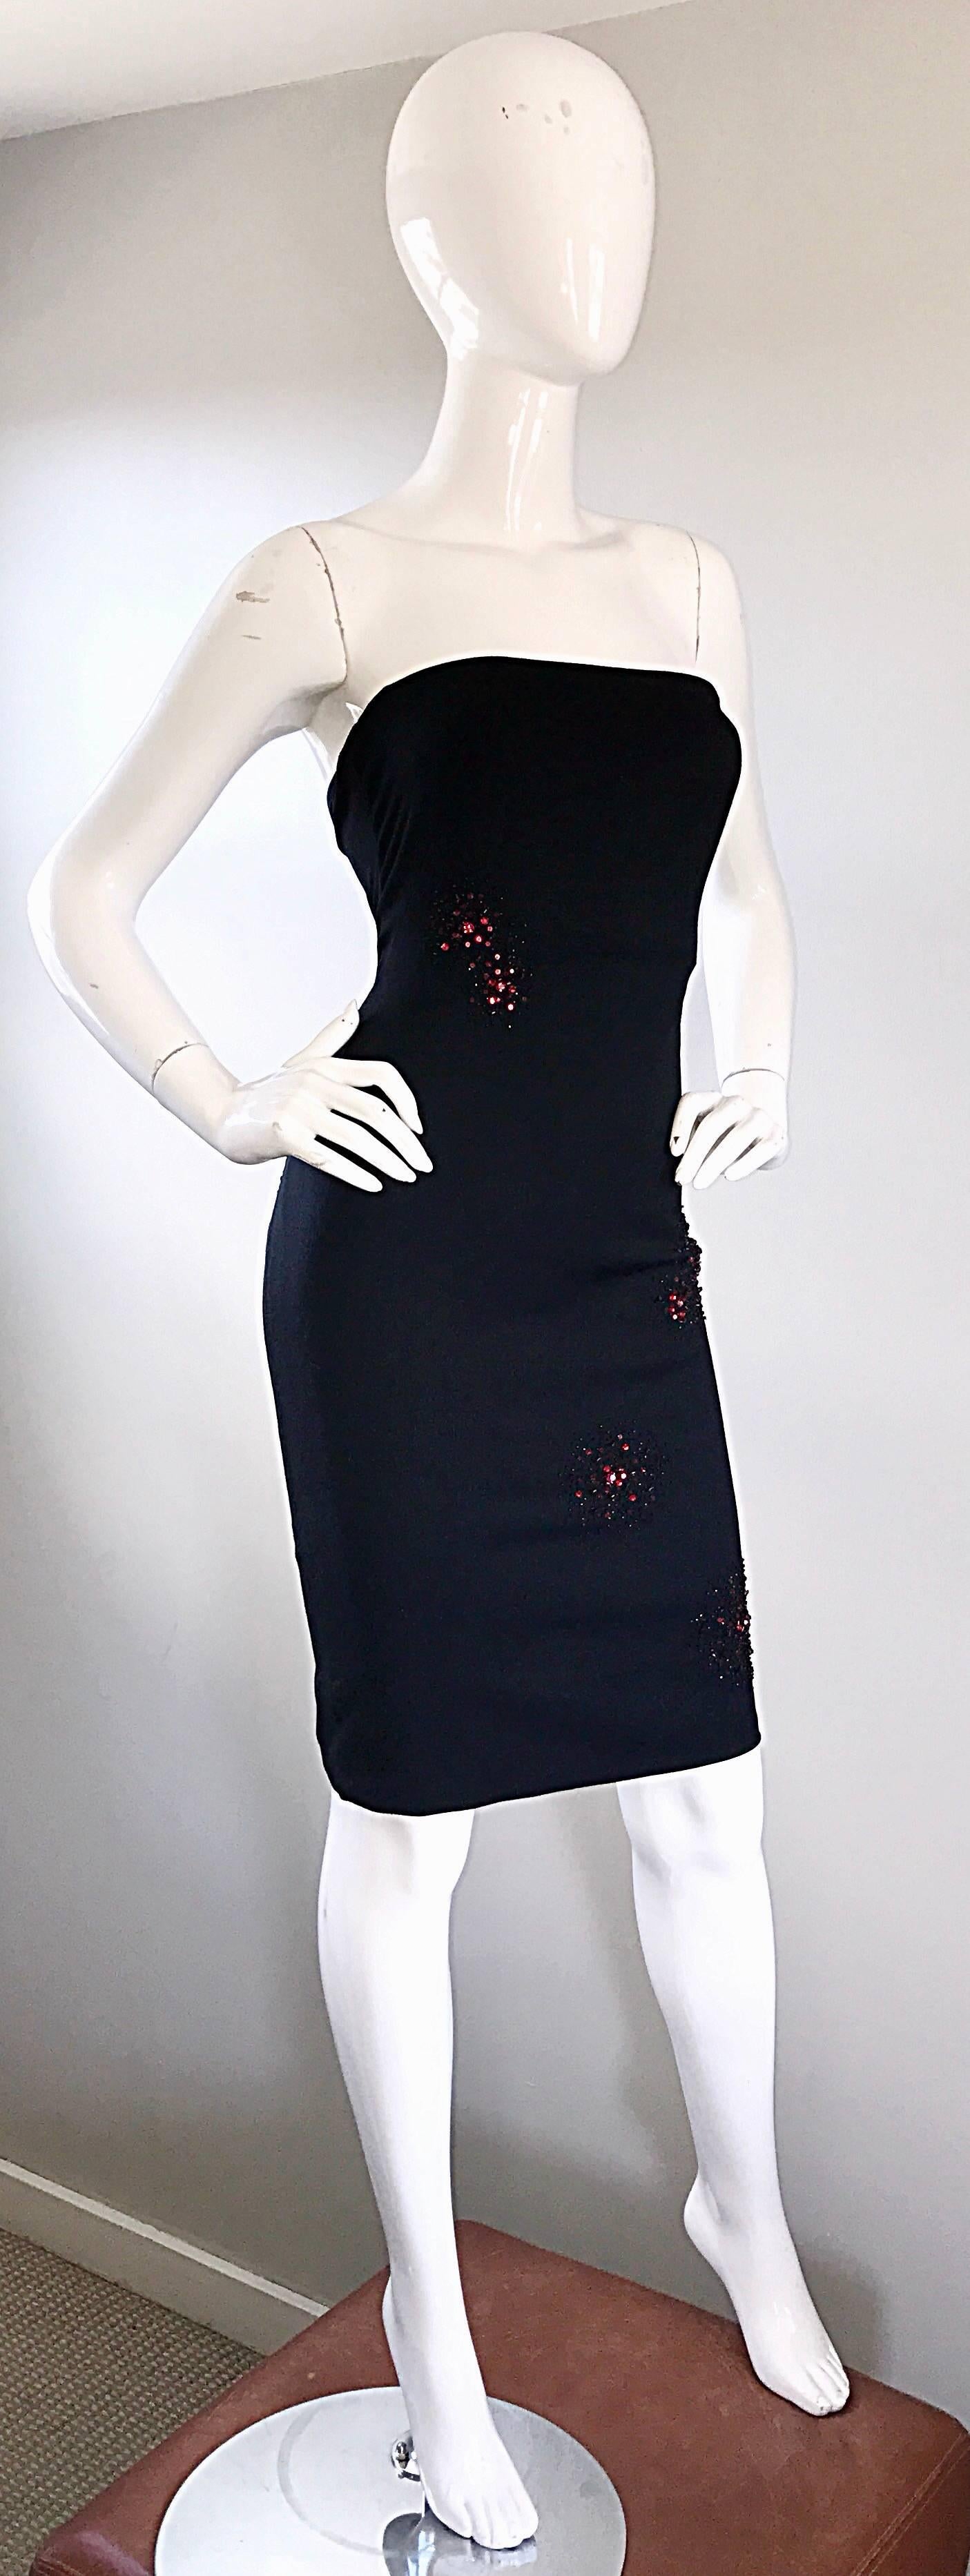 Women's 1990s Gianni Versace Couture Black + Red Strapless Beaded Bodycon Vintage Dress For Sale